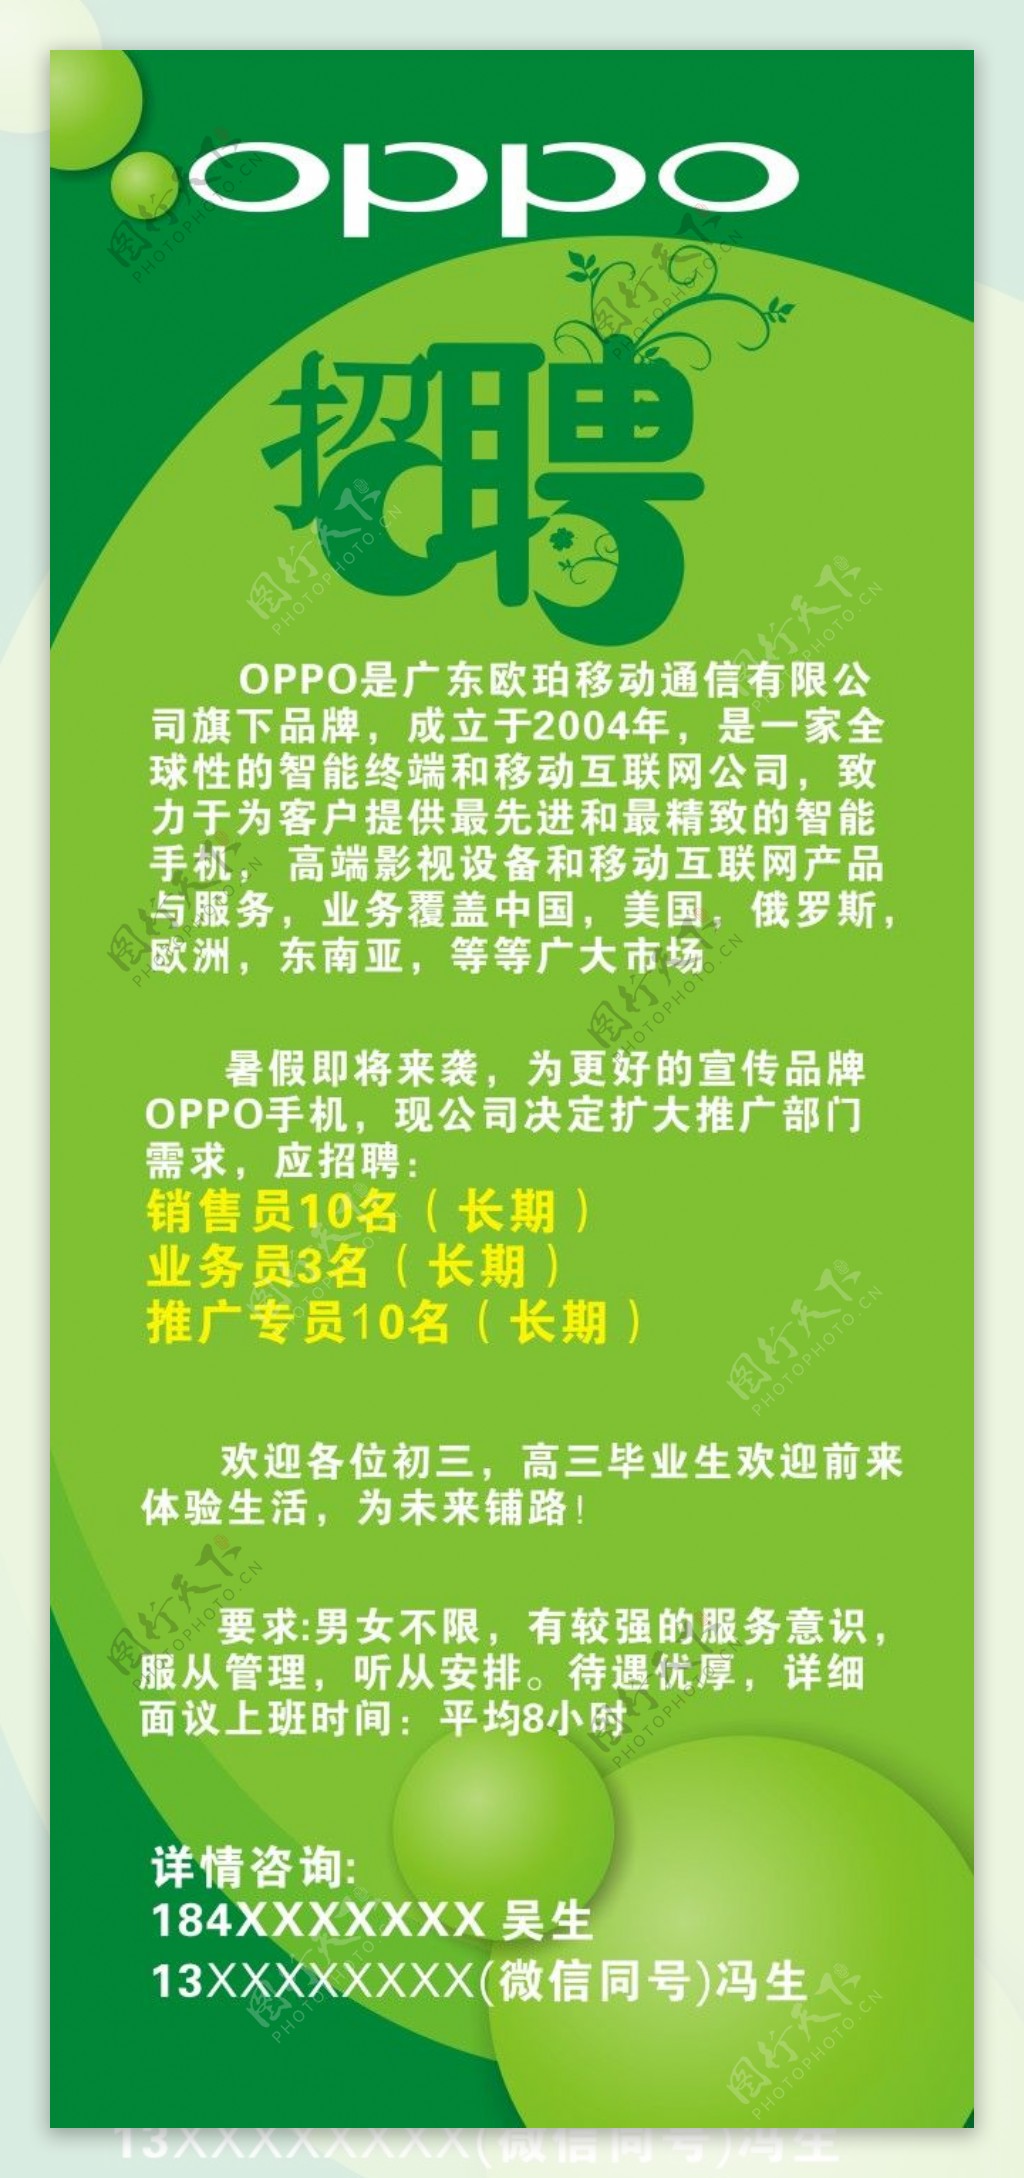 OPPO招聘x展架